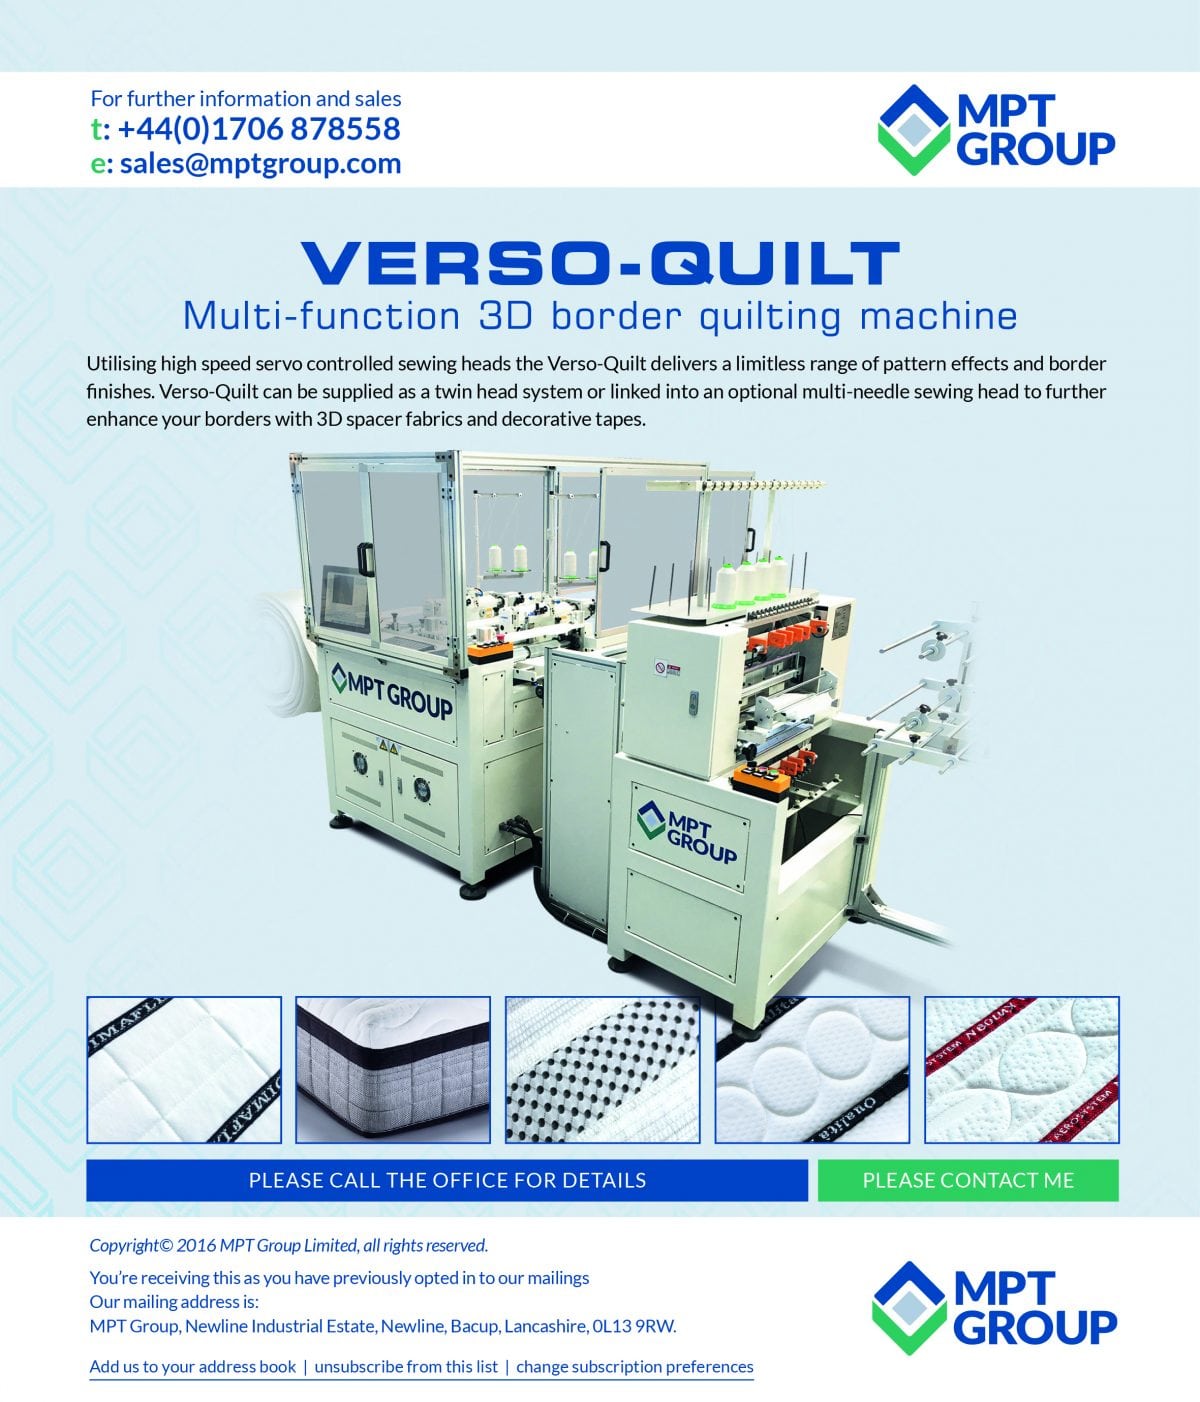 New Verso Quilt Multi-Function 3D border quilting machine